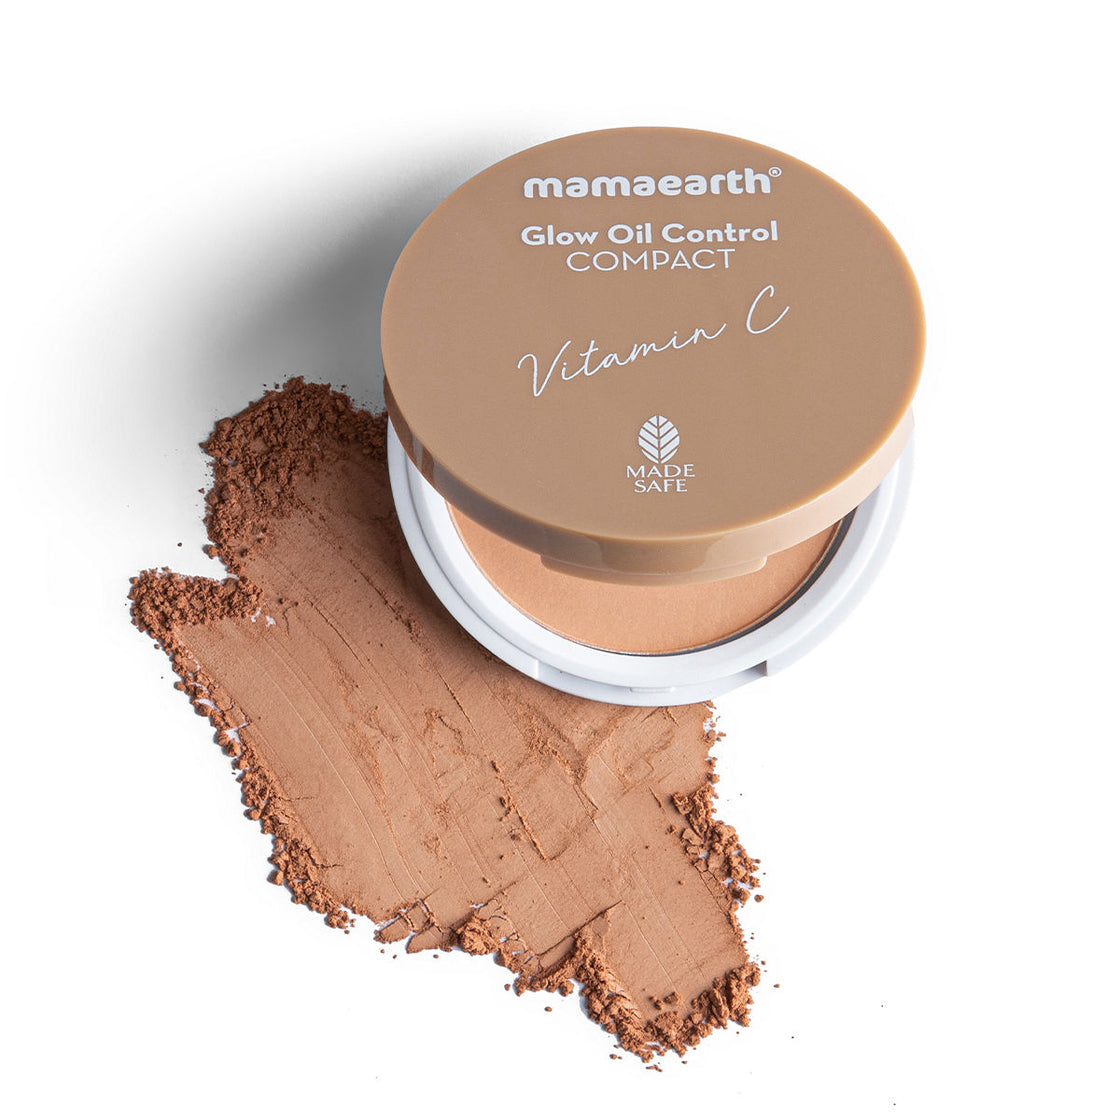 Mamaearth Glow Oil Control Compact Spf 30 With Vitamin C & Turmeric - 01 Ivory Glow-3